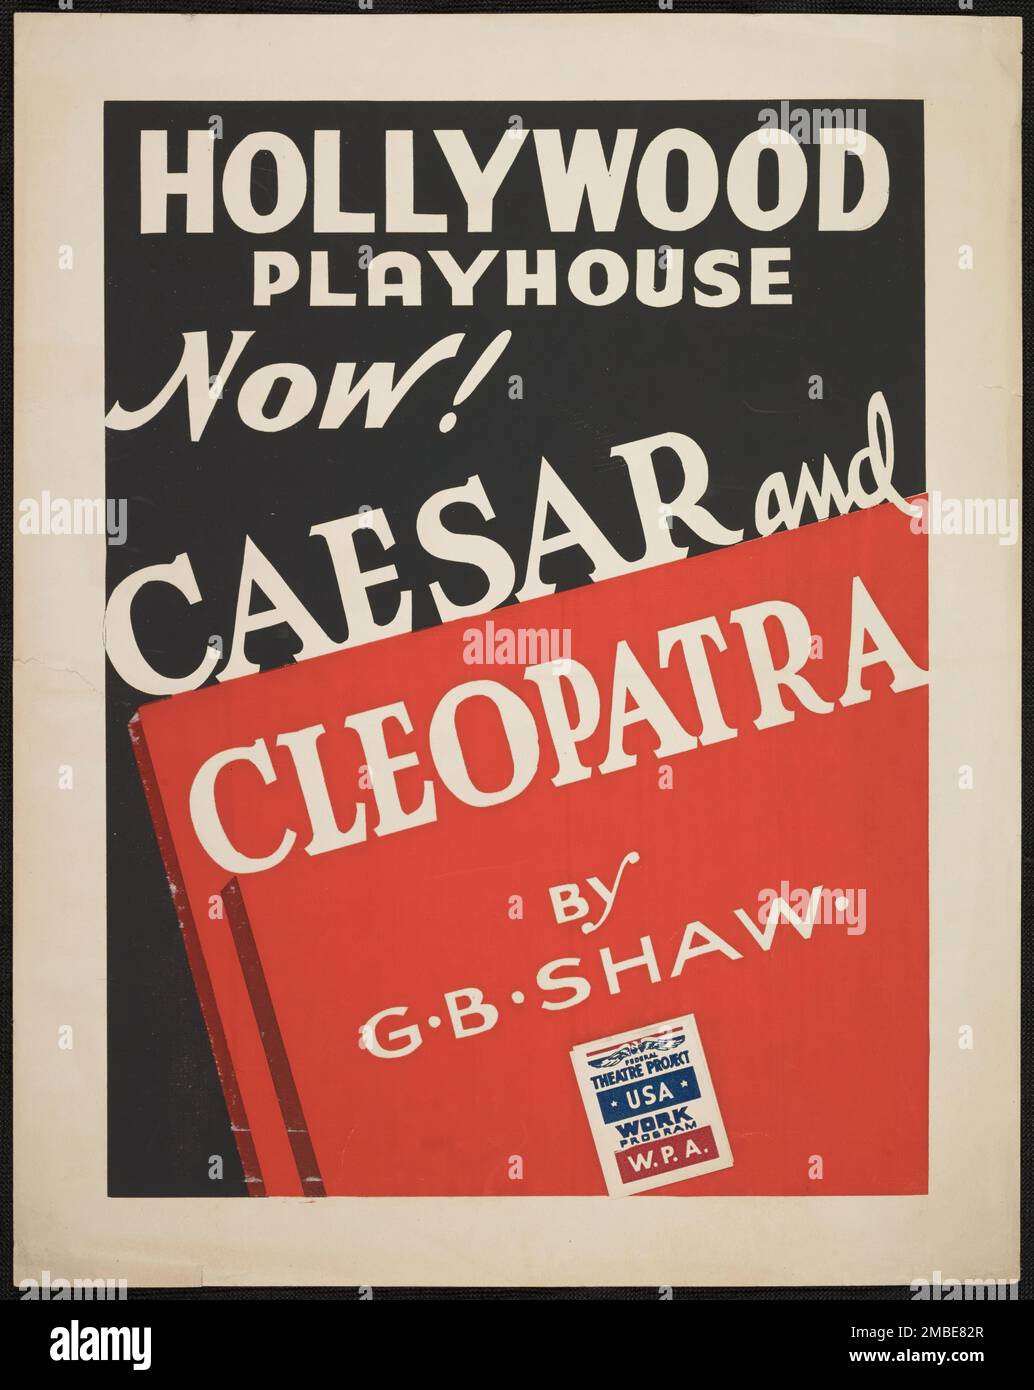 Caesar and Cleopatra, Los Angeles, 1938. 'Hollywood Playhouse Now! - Caesar  and Cleopatra by G.B. Shaw'. The Federal Theatre Project, created by the  U.S. Works Progress Administration in 1935, was designed to